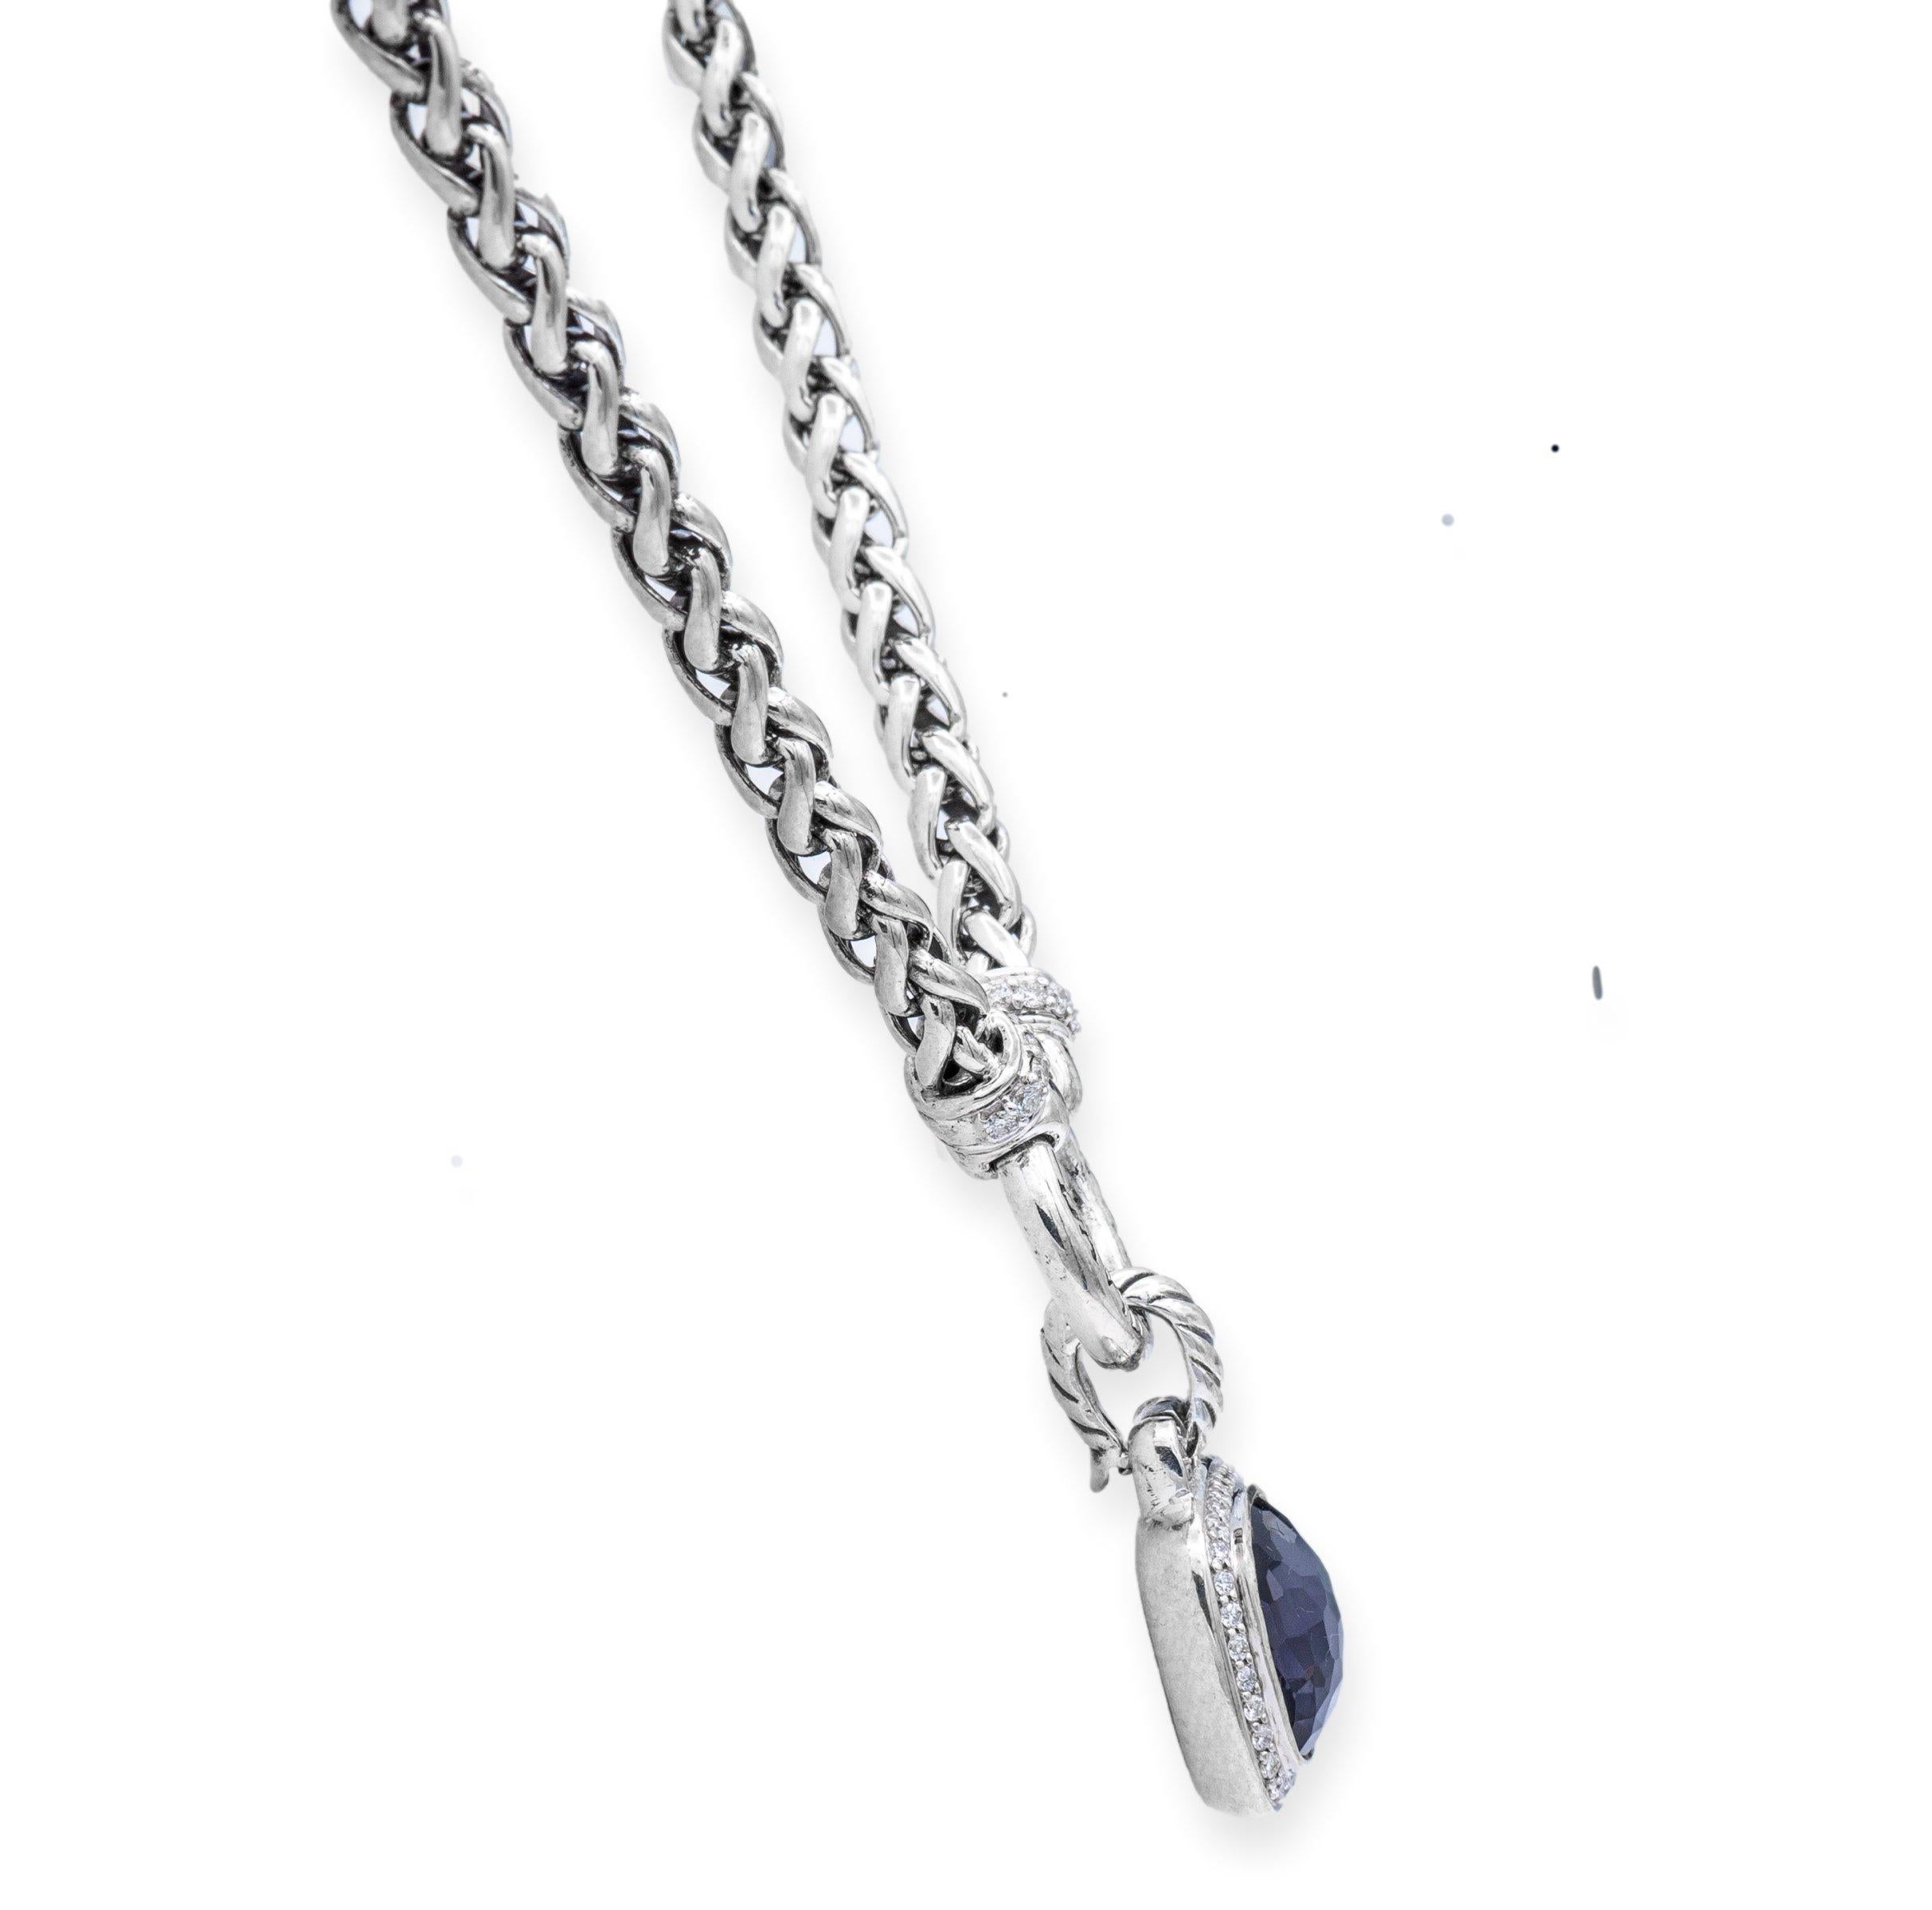 David Yurman signature necklace from The Albion® Collection’s finely crafted in sterling silver featuring a unique cushion-cut center stone defined by David Yurman as a Faceted black orchid (Lavender Amethyst backed with Hematite) adorned with a